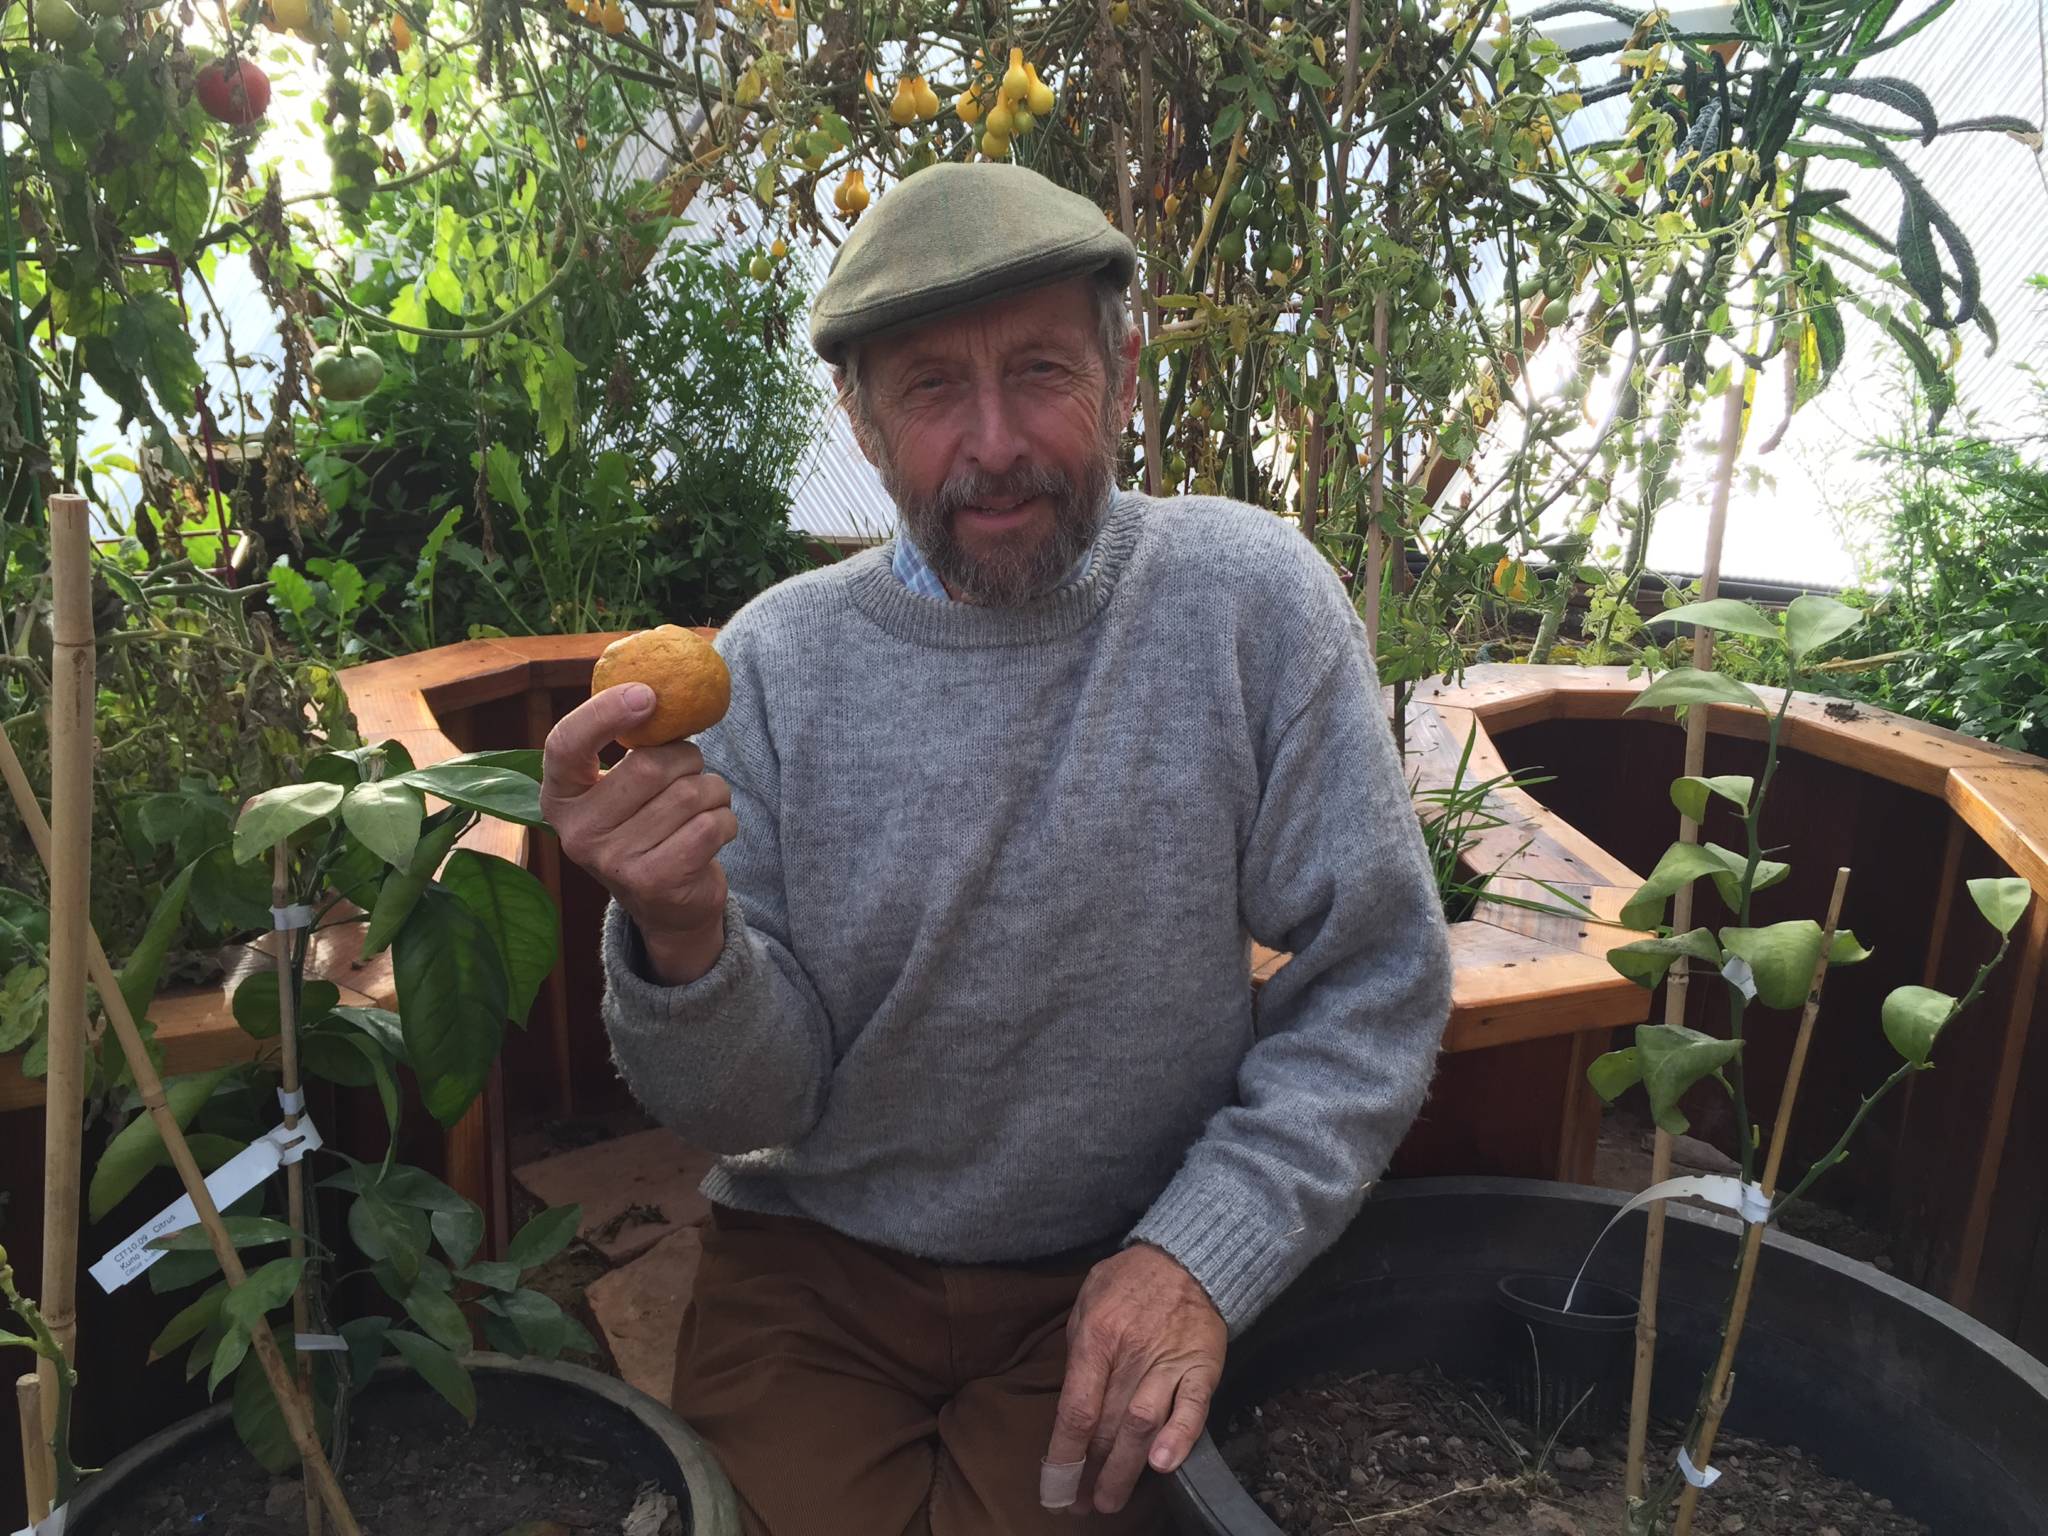 Udgar holding an orange grown in a Growing Dome greenhouse